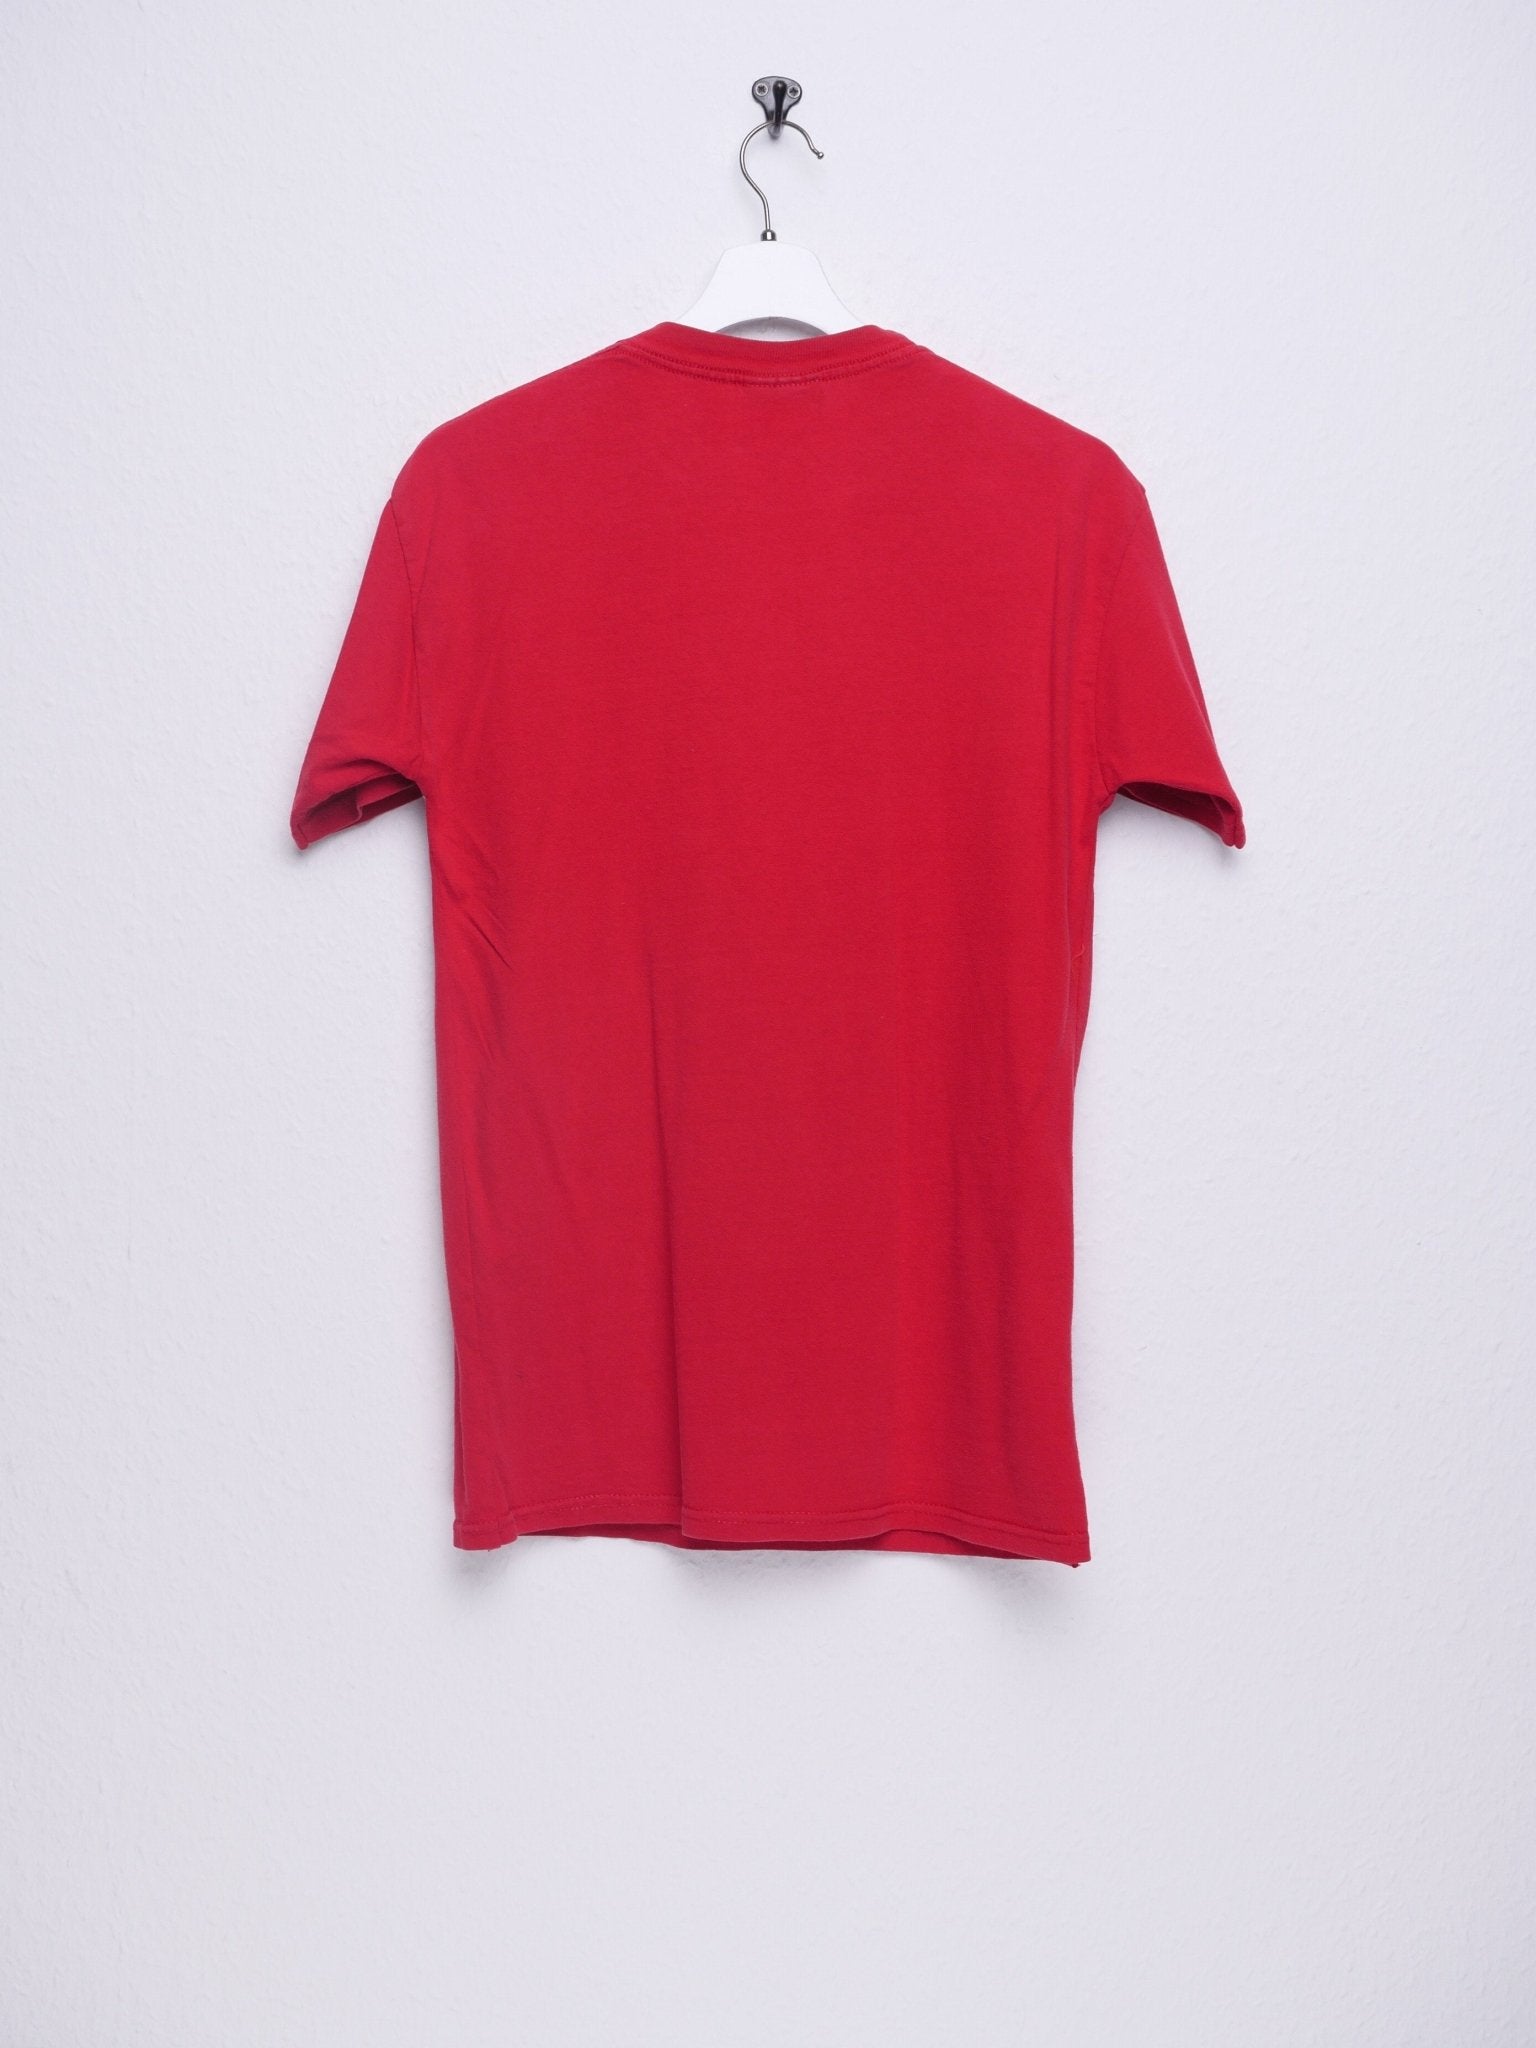 'USA' embroidered Spellout red Shirt - Peeces